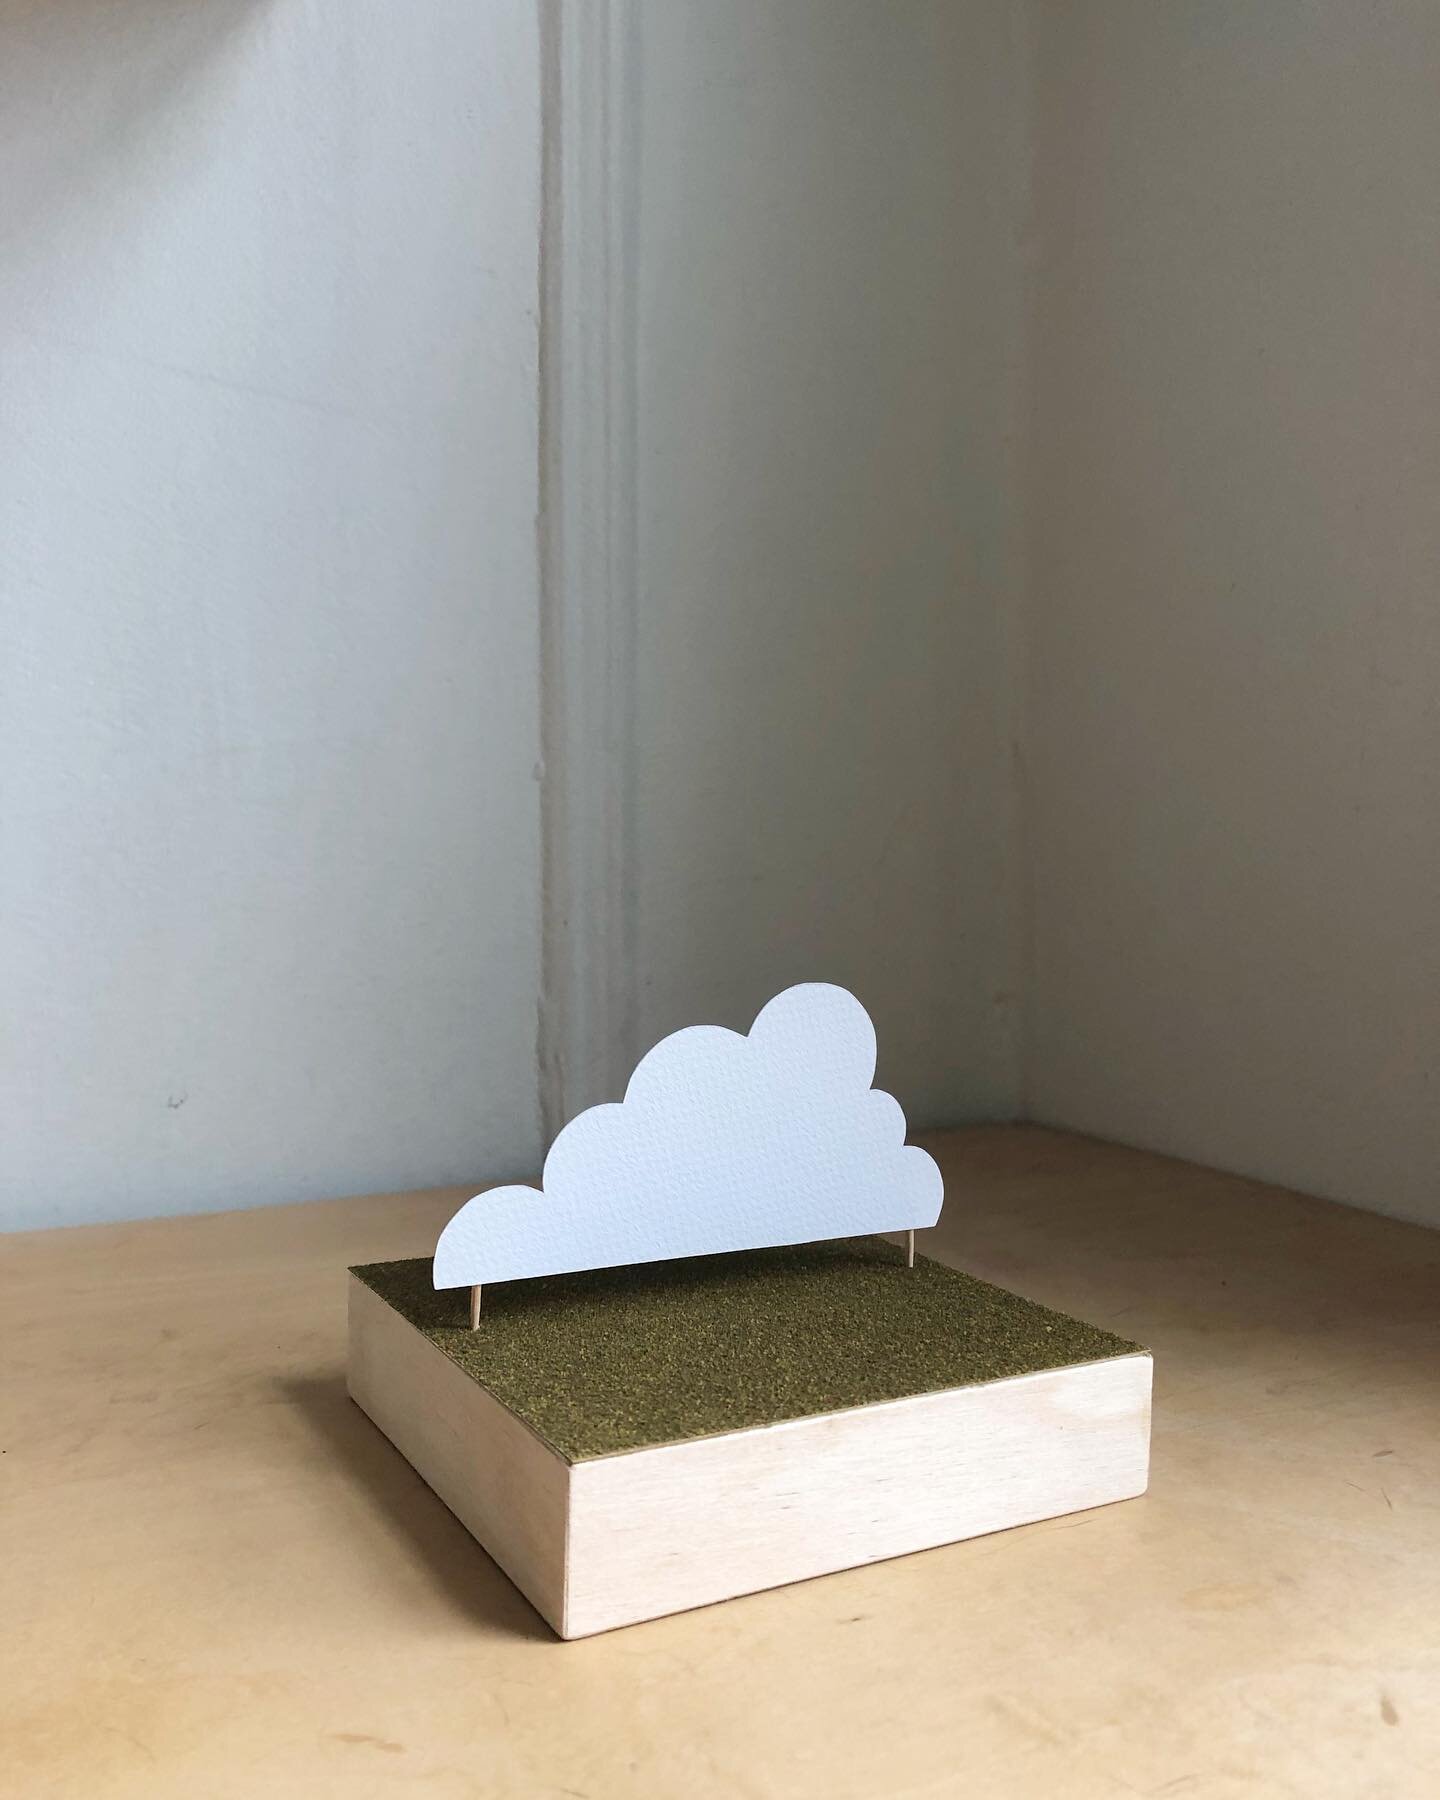 low lying cloud
plywood, paper, model grass, toothpicks
3.5 x 5 x 5 inches